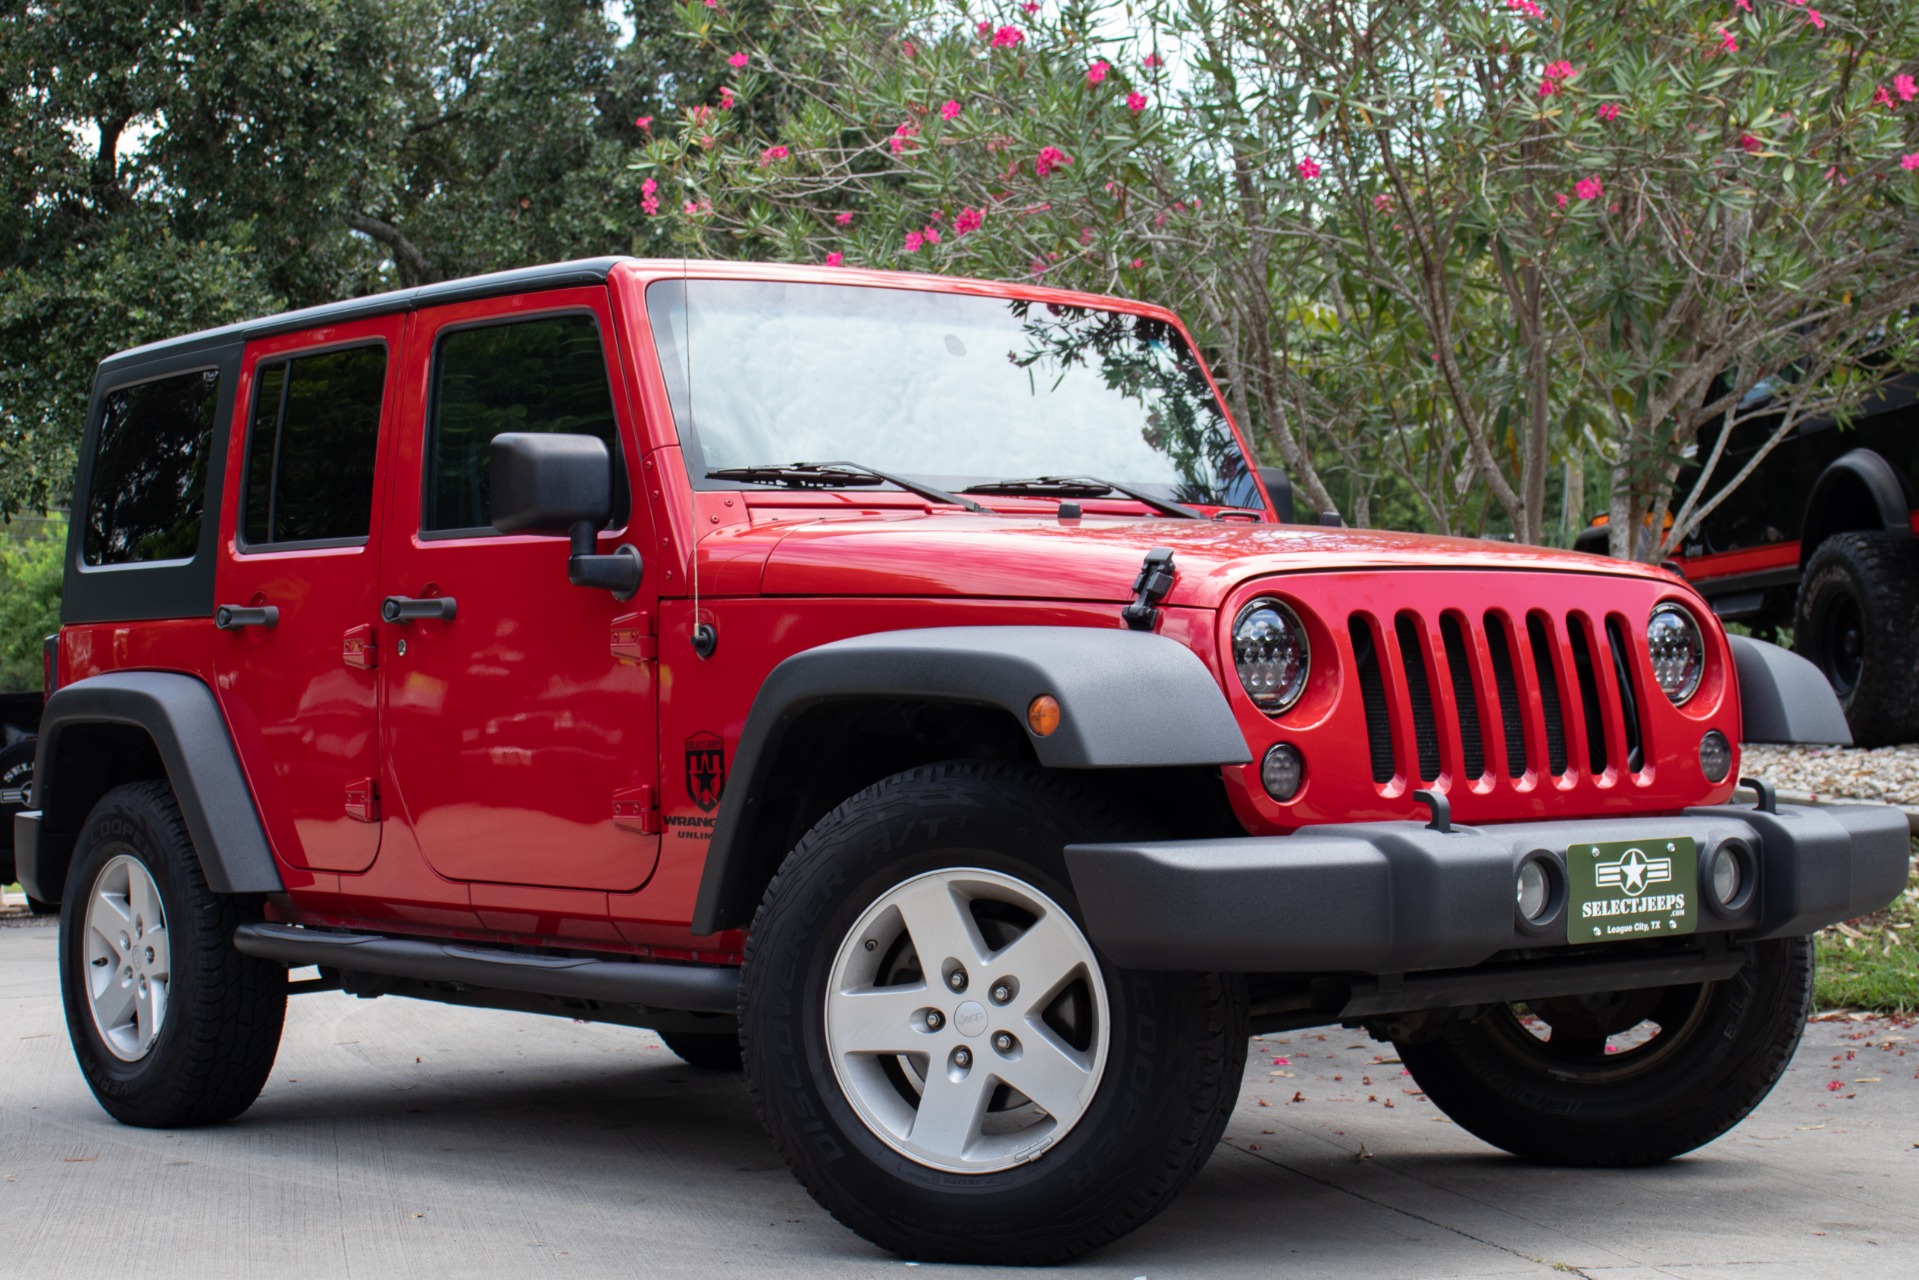 Used 2008 Jeep Wrangler Unlimited X For Sale ($18,995) | Select Jeeps Inc.  Stock #640233